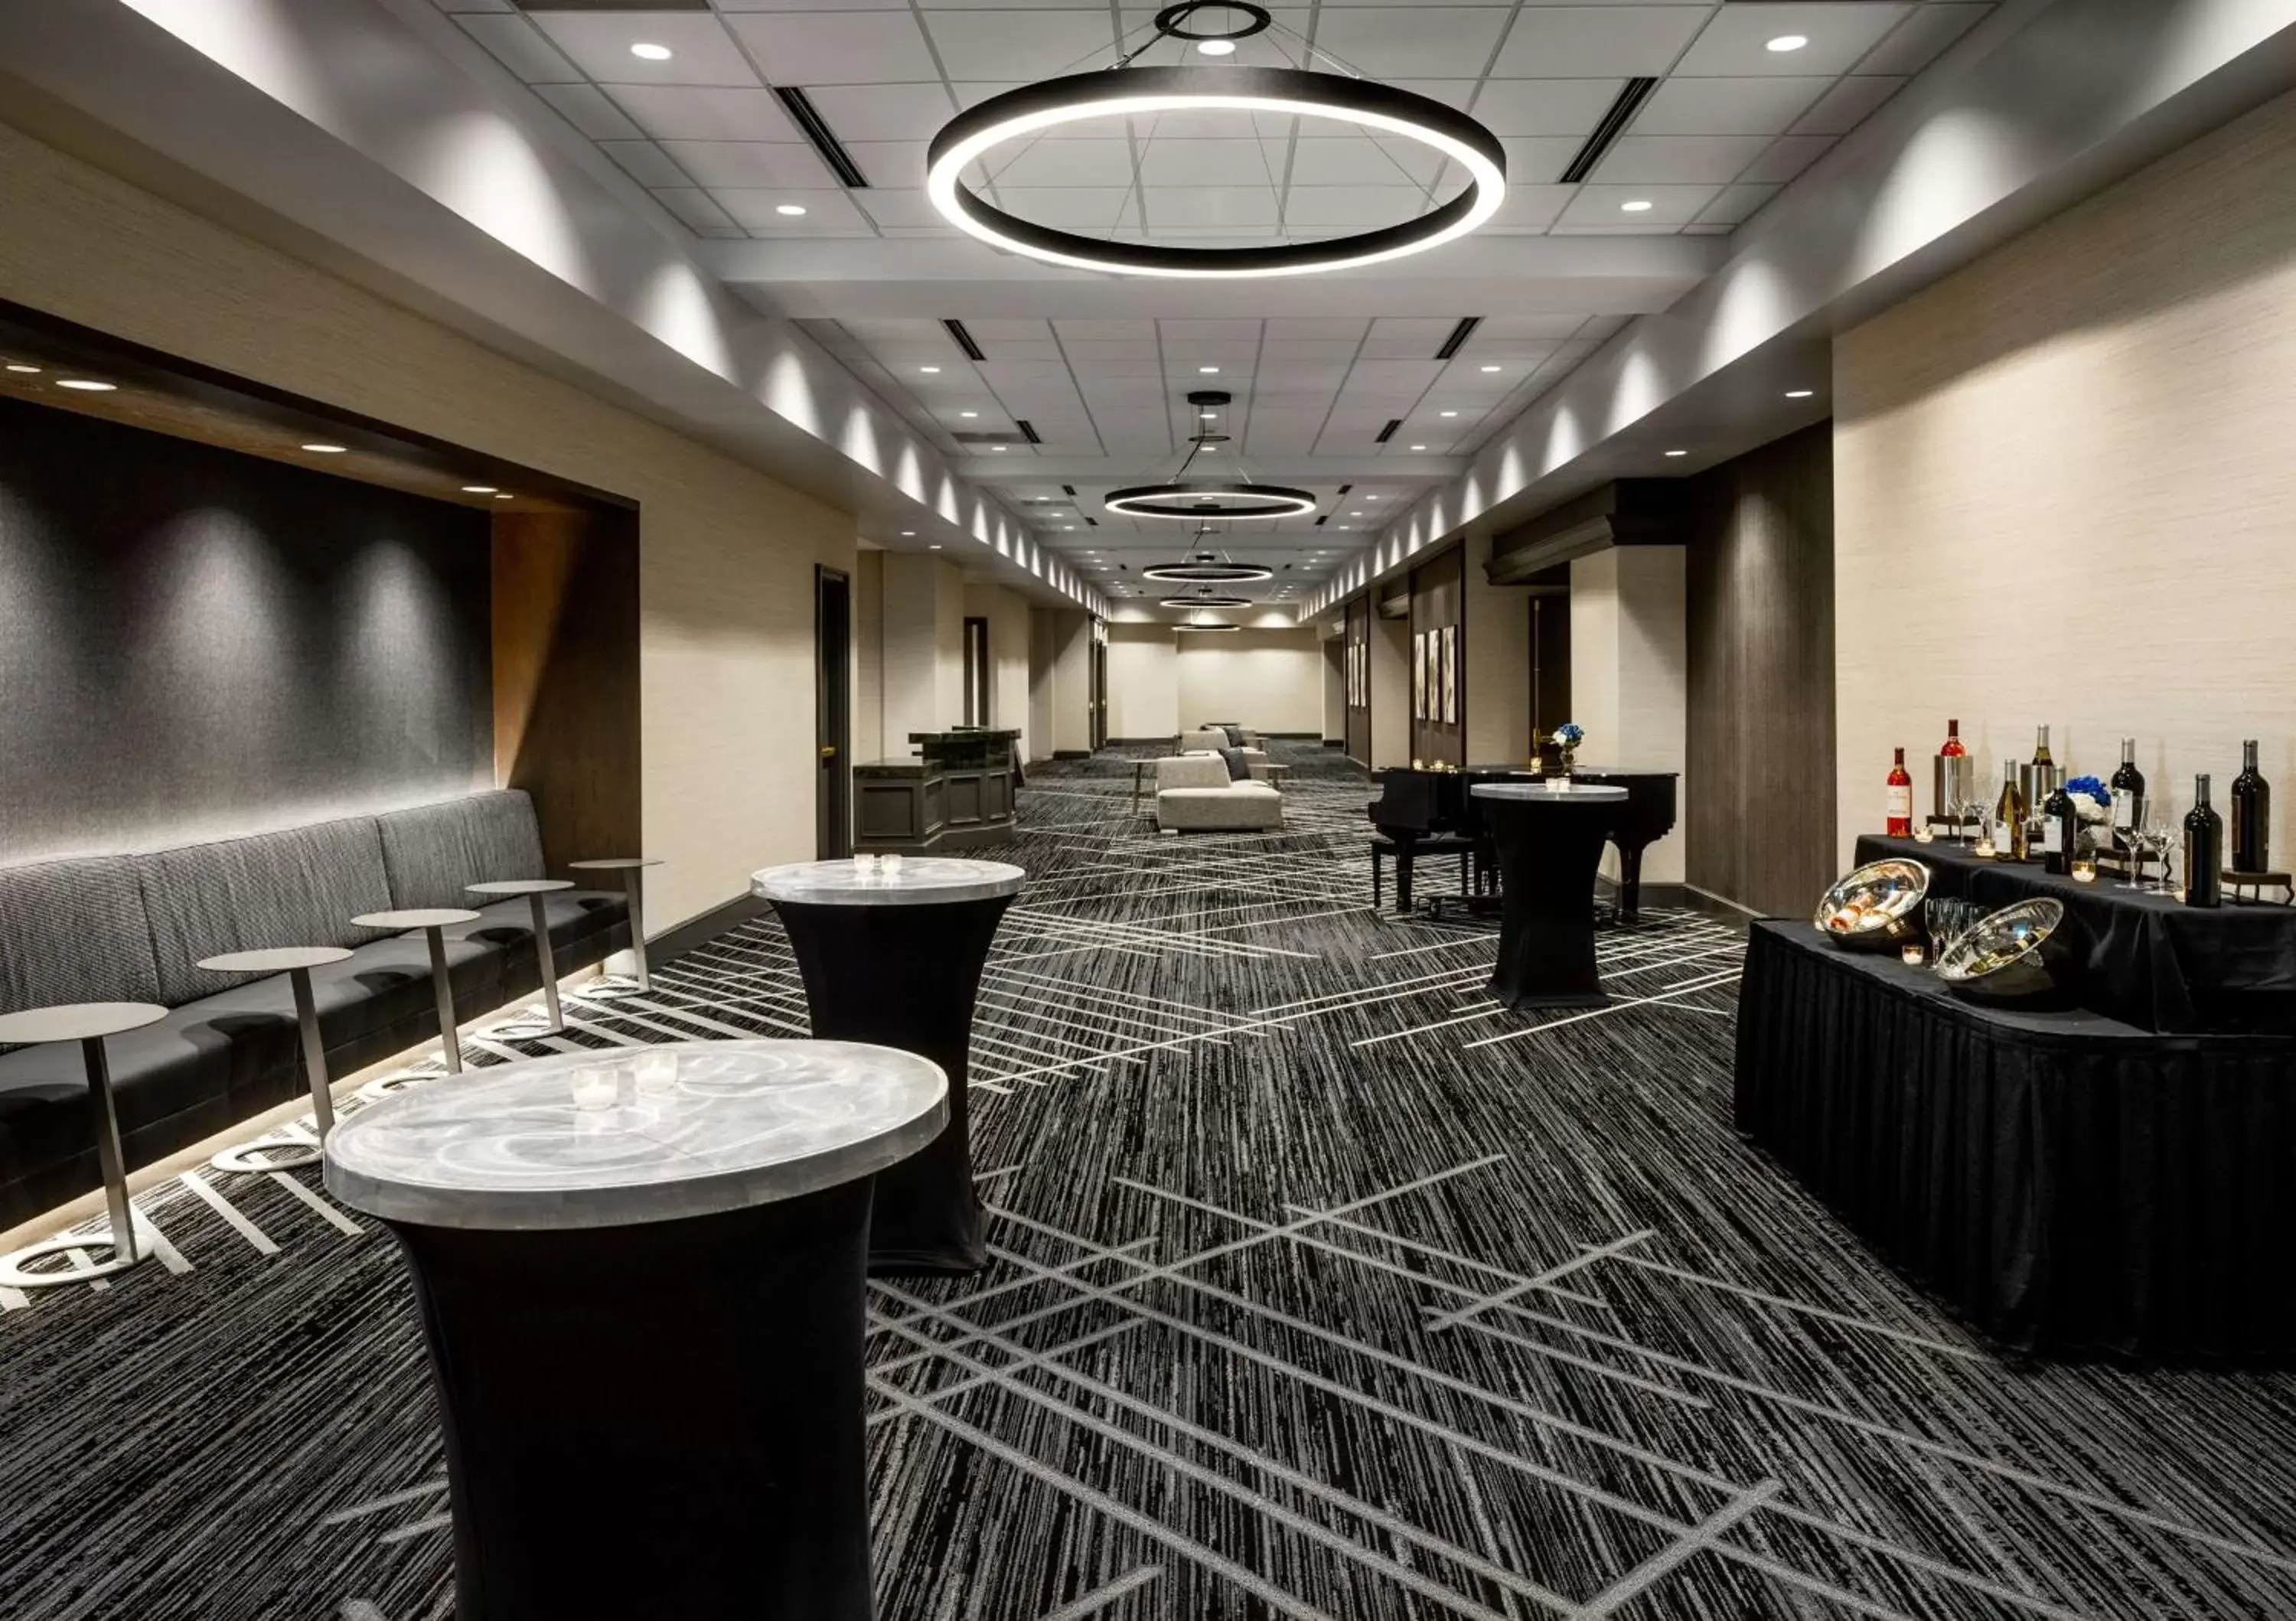 Meeting/conference room, Banquet Facilities in Hilton Charlotte Airport Hotel